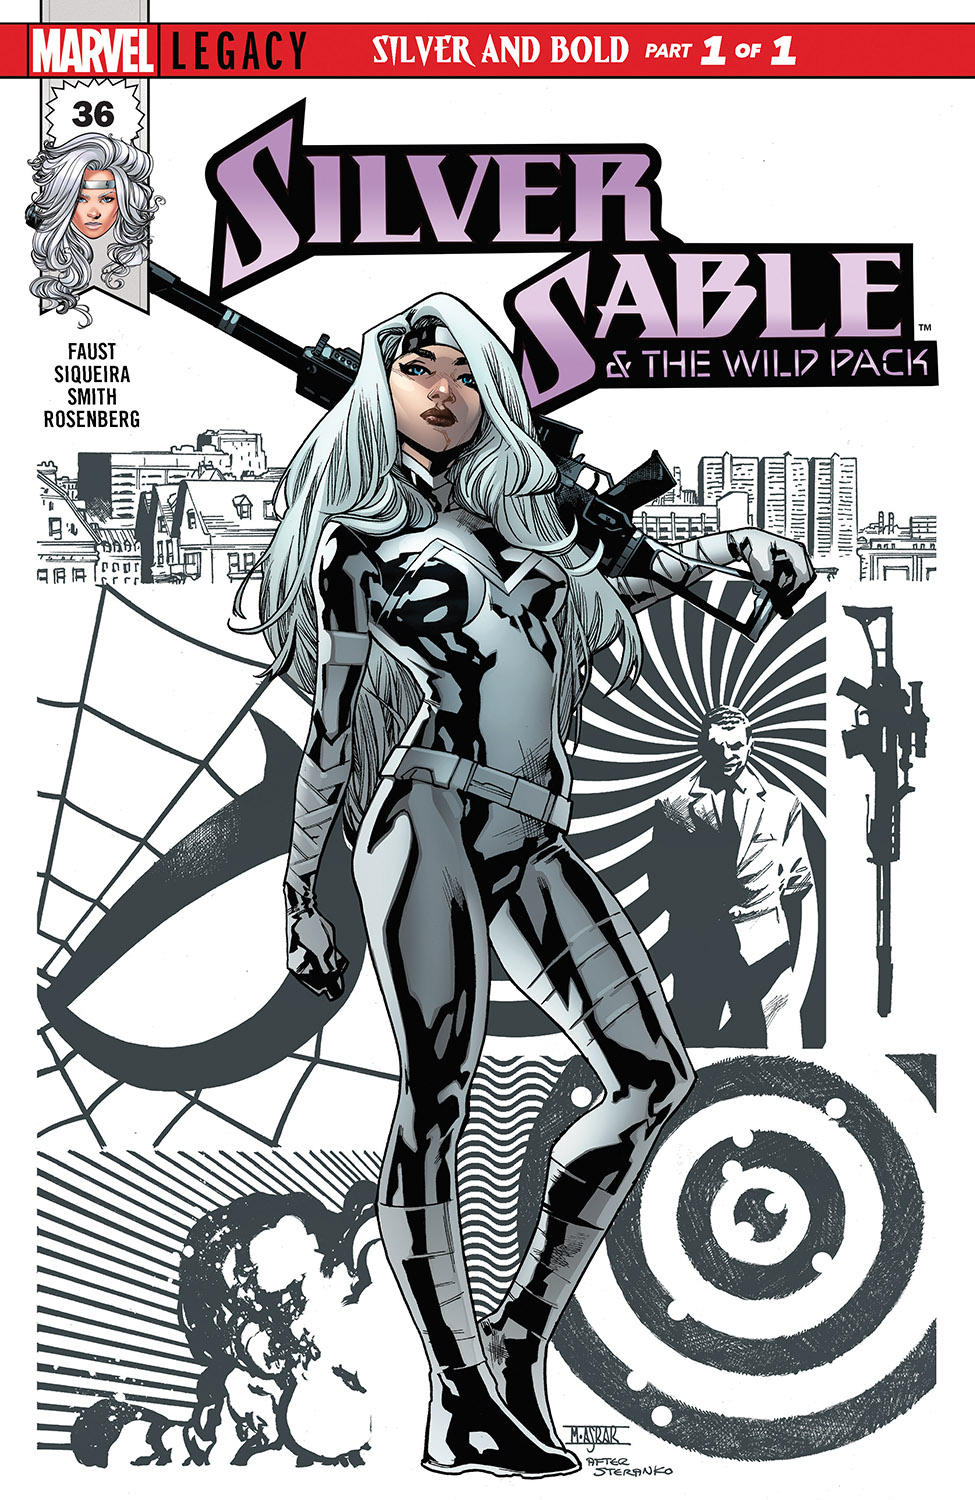 Silver Sable and the Wild Pack (2017) #36